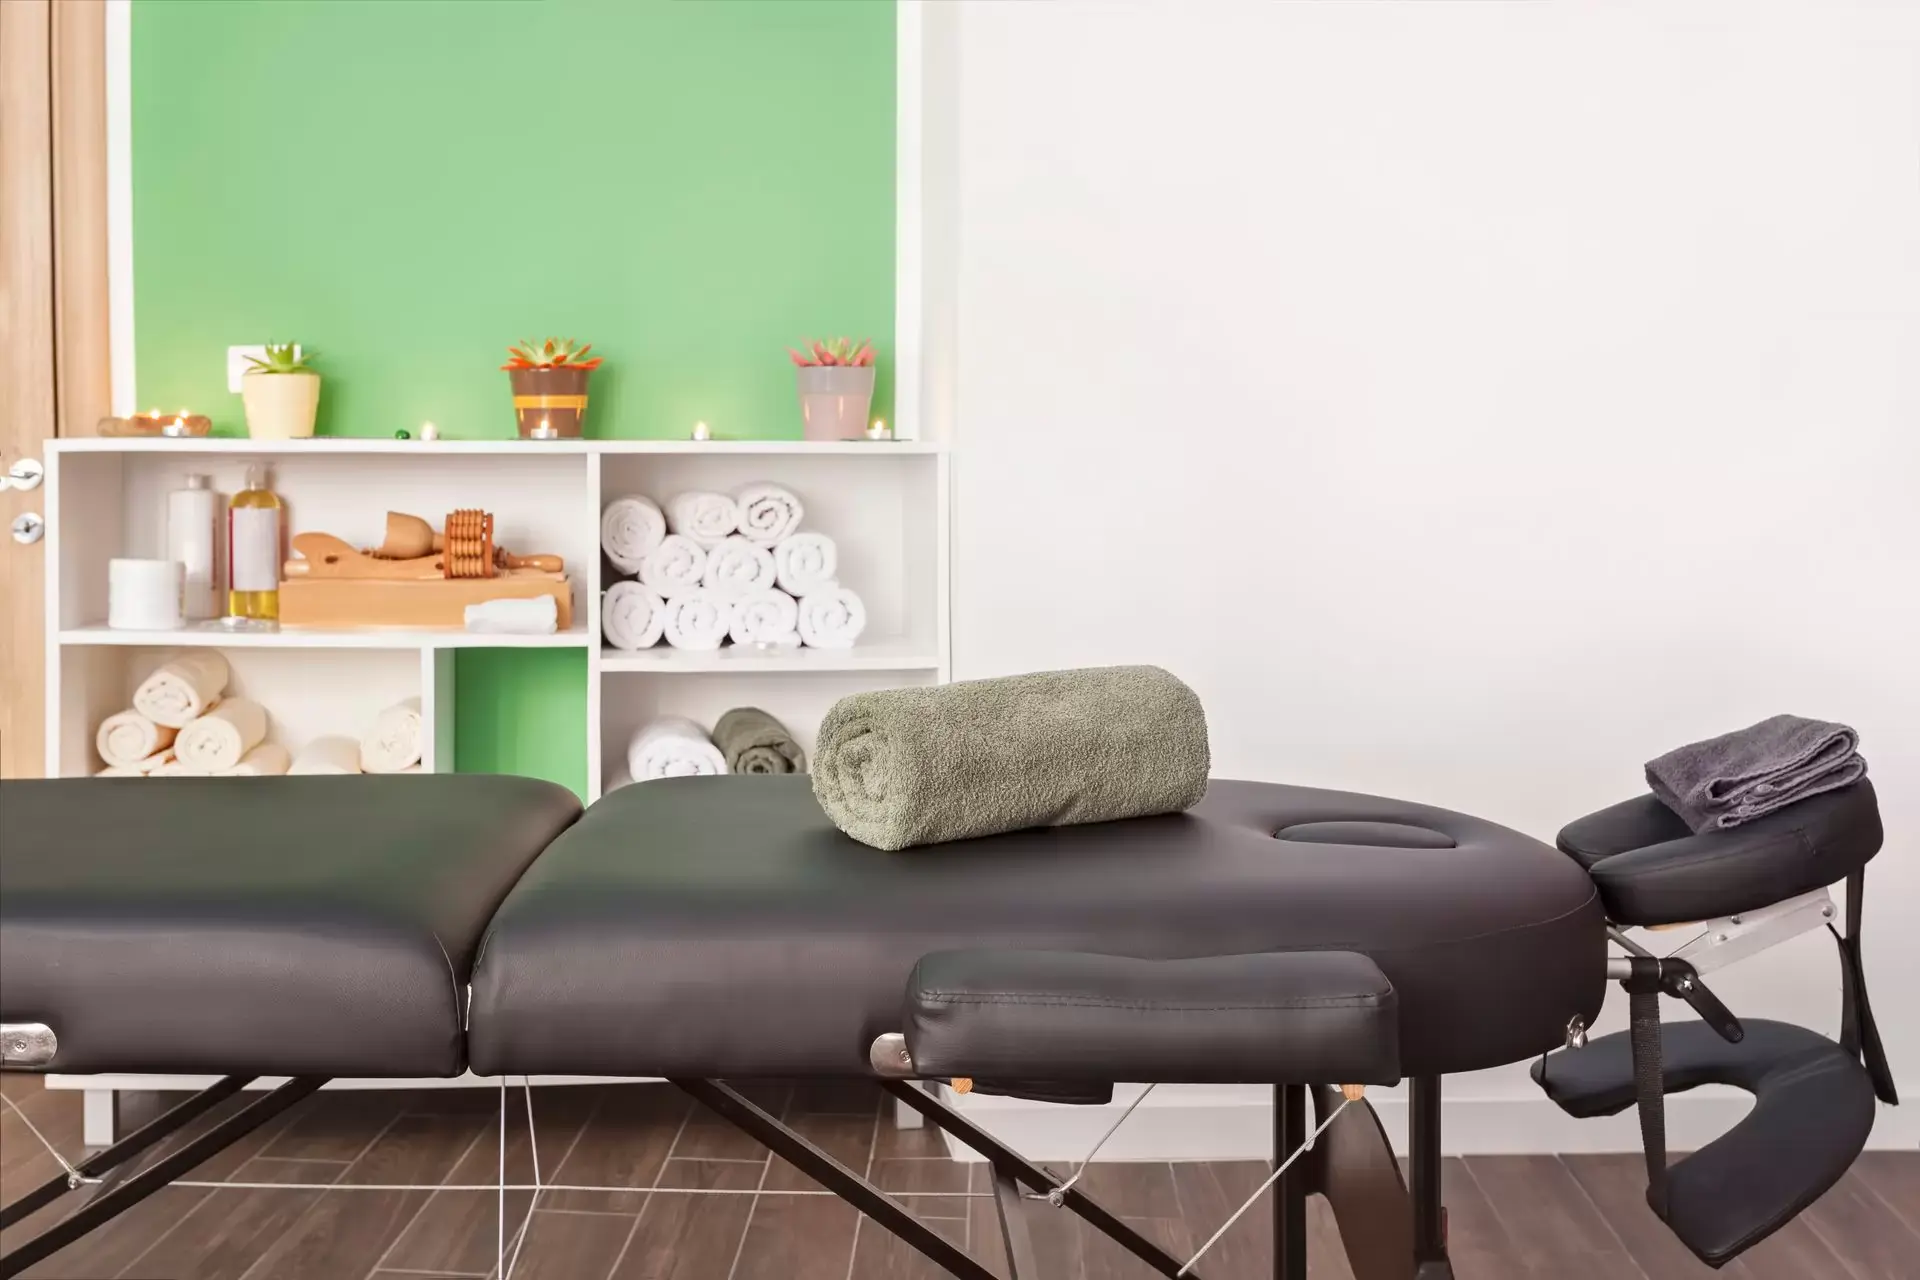 Professional massage tables &#8211; a buyer&#8217;s guide